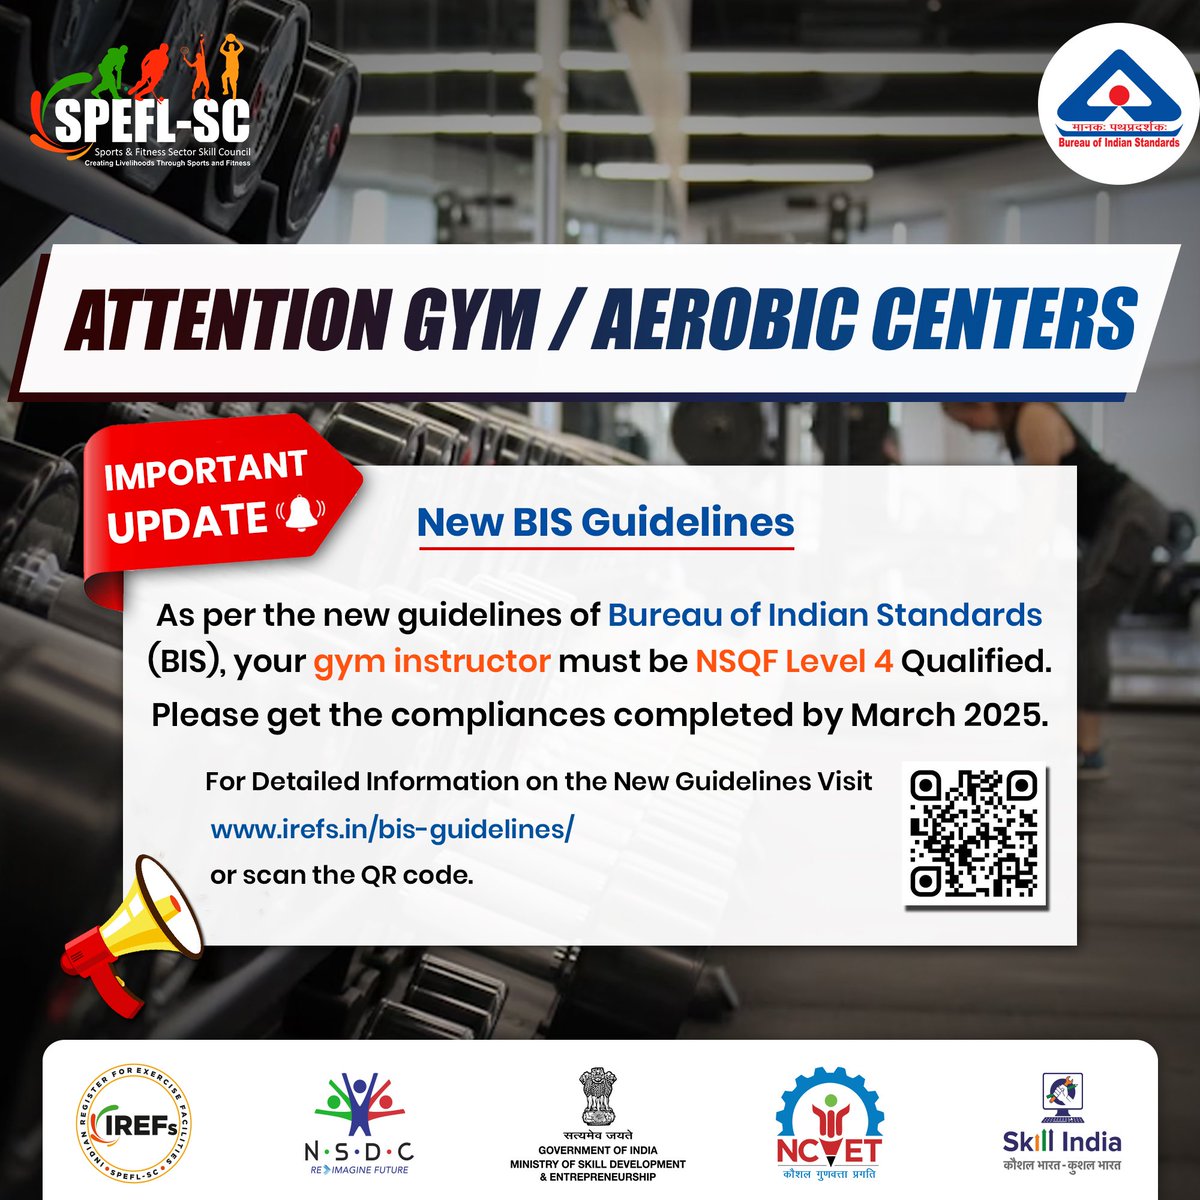 Attention gym and aerobic centers! 🏋️‍♀️🏃‍♂️
📢 Important Information 📢
As per the new guidelines of Bureau of Indian Standards (BIS), your gym instructor must be NSQF Level 4 Qualified.
Please get the compliances completed by March 2025.